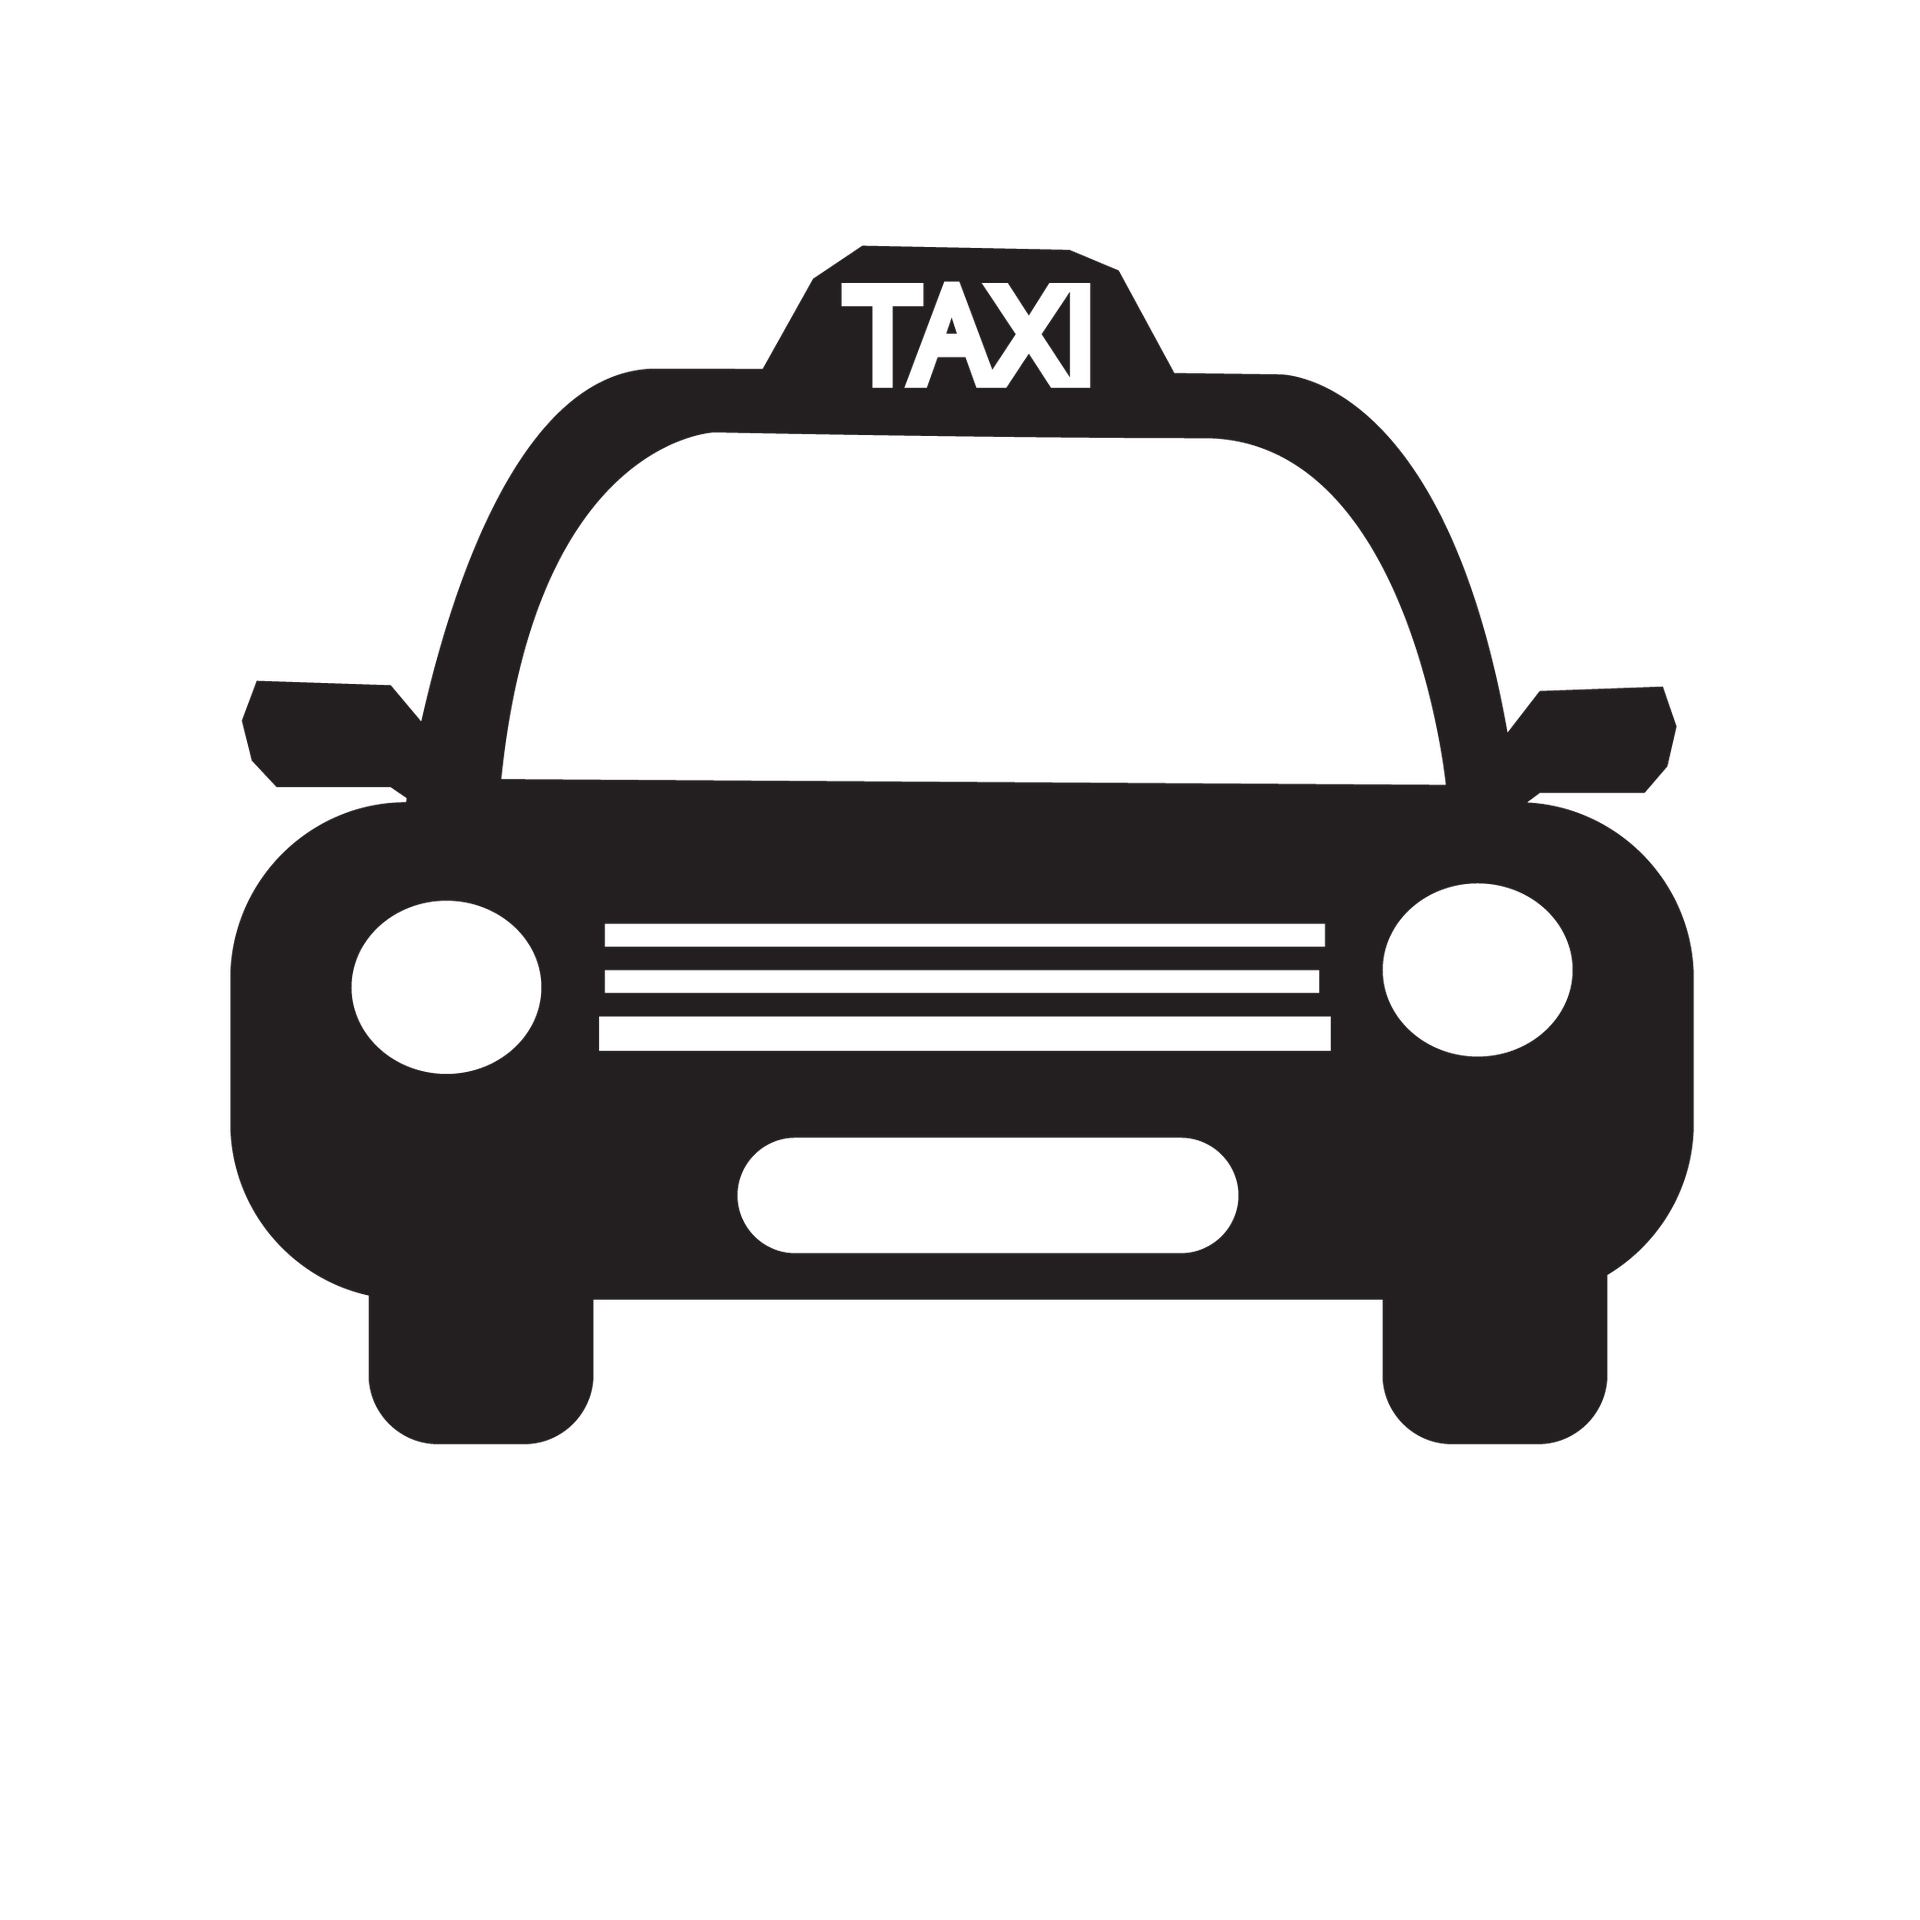 LEWES STATION TAXIS